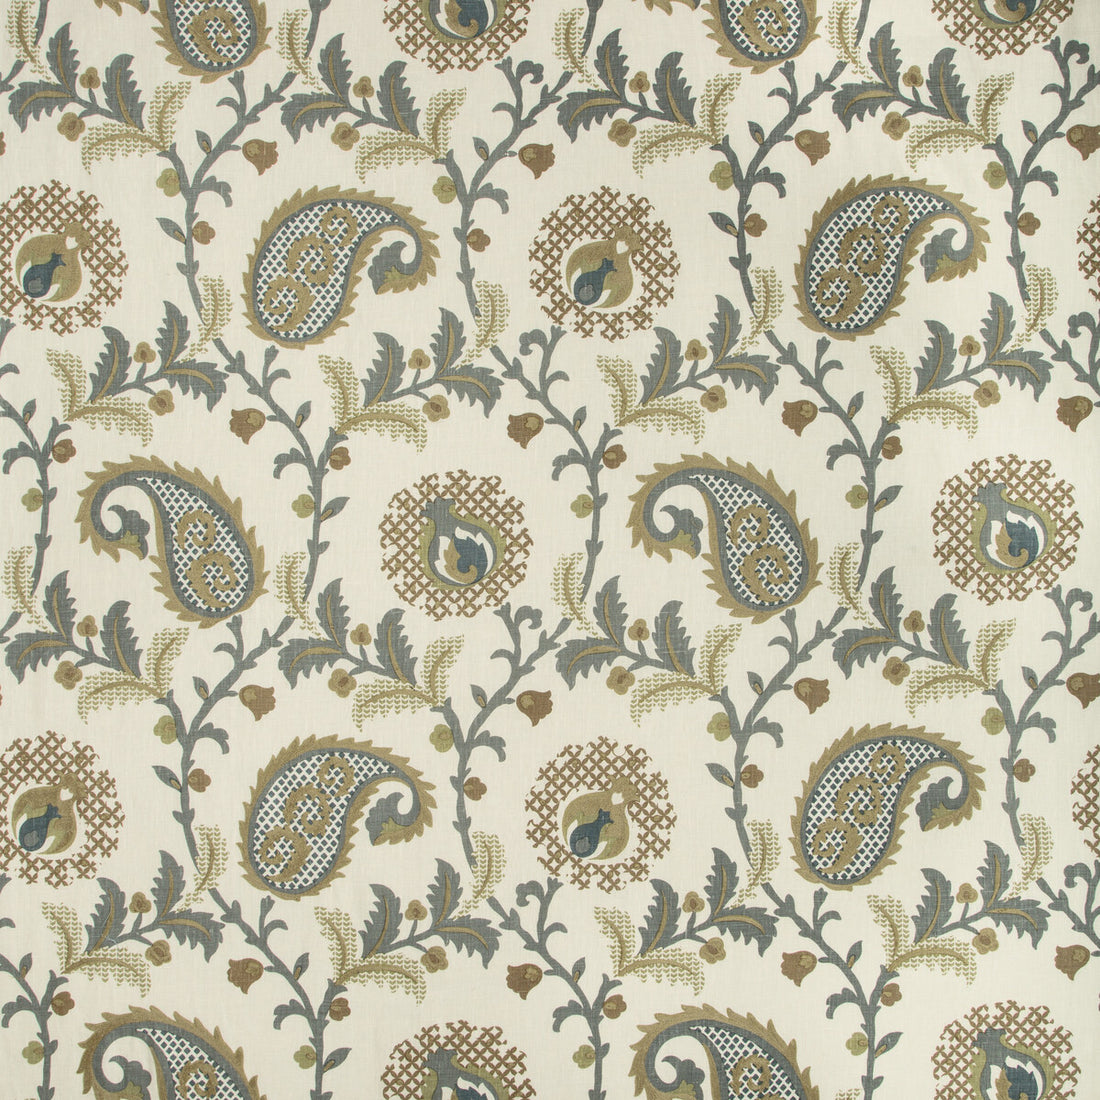 Saudade Paisley fabric in dried thyme color - pattern SAUDADE.321.0 - by Kravet Design in the Barclay Butera Sagamore collection